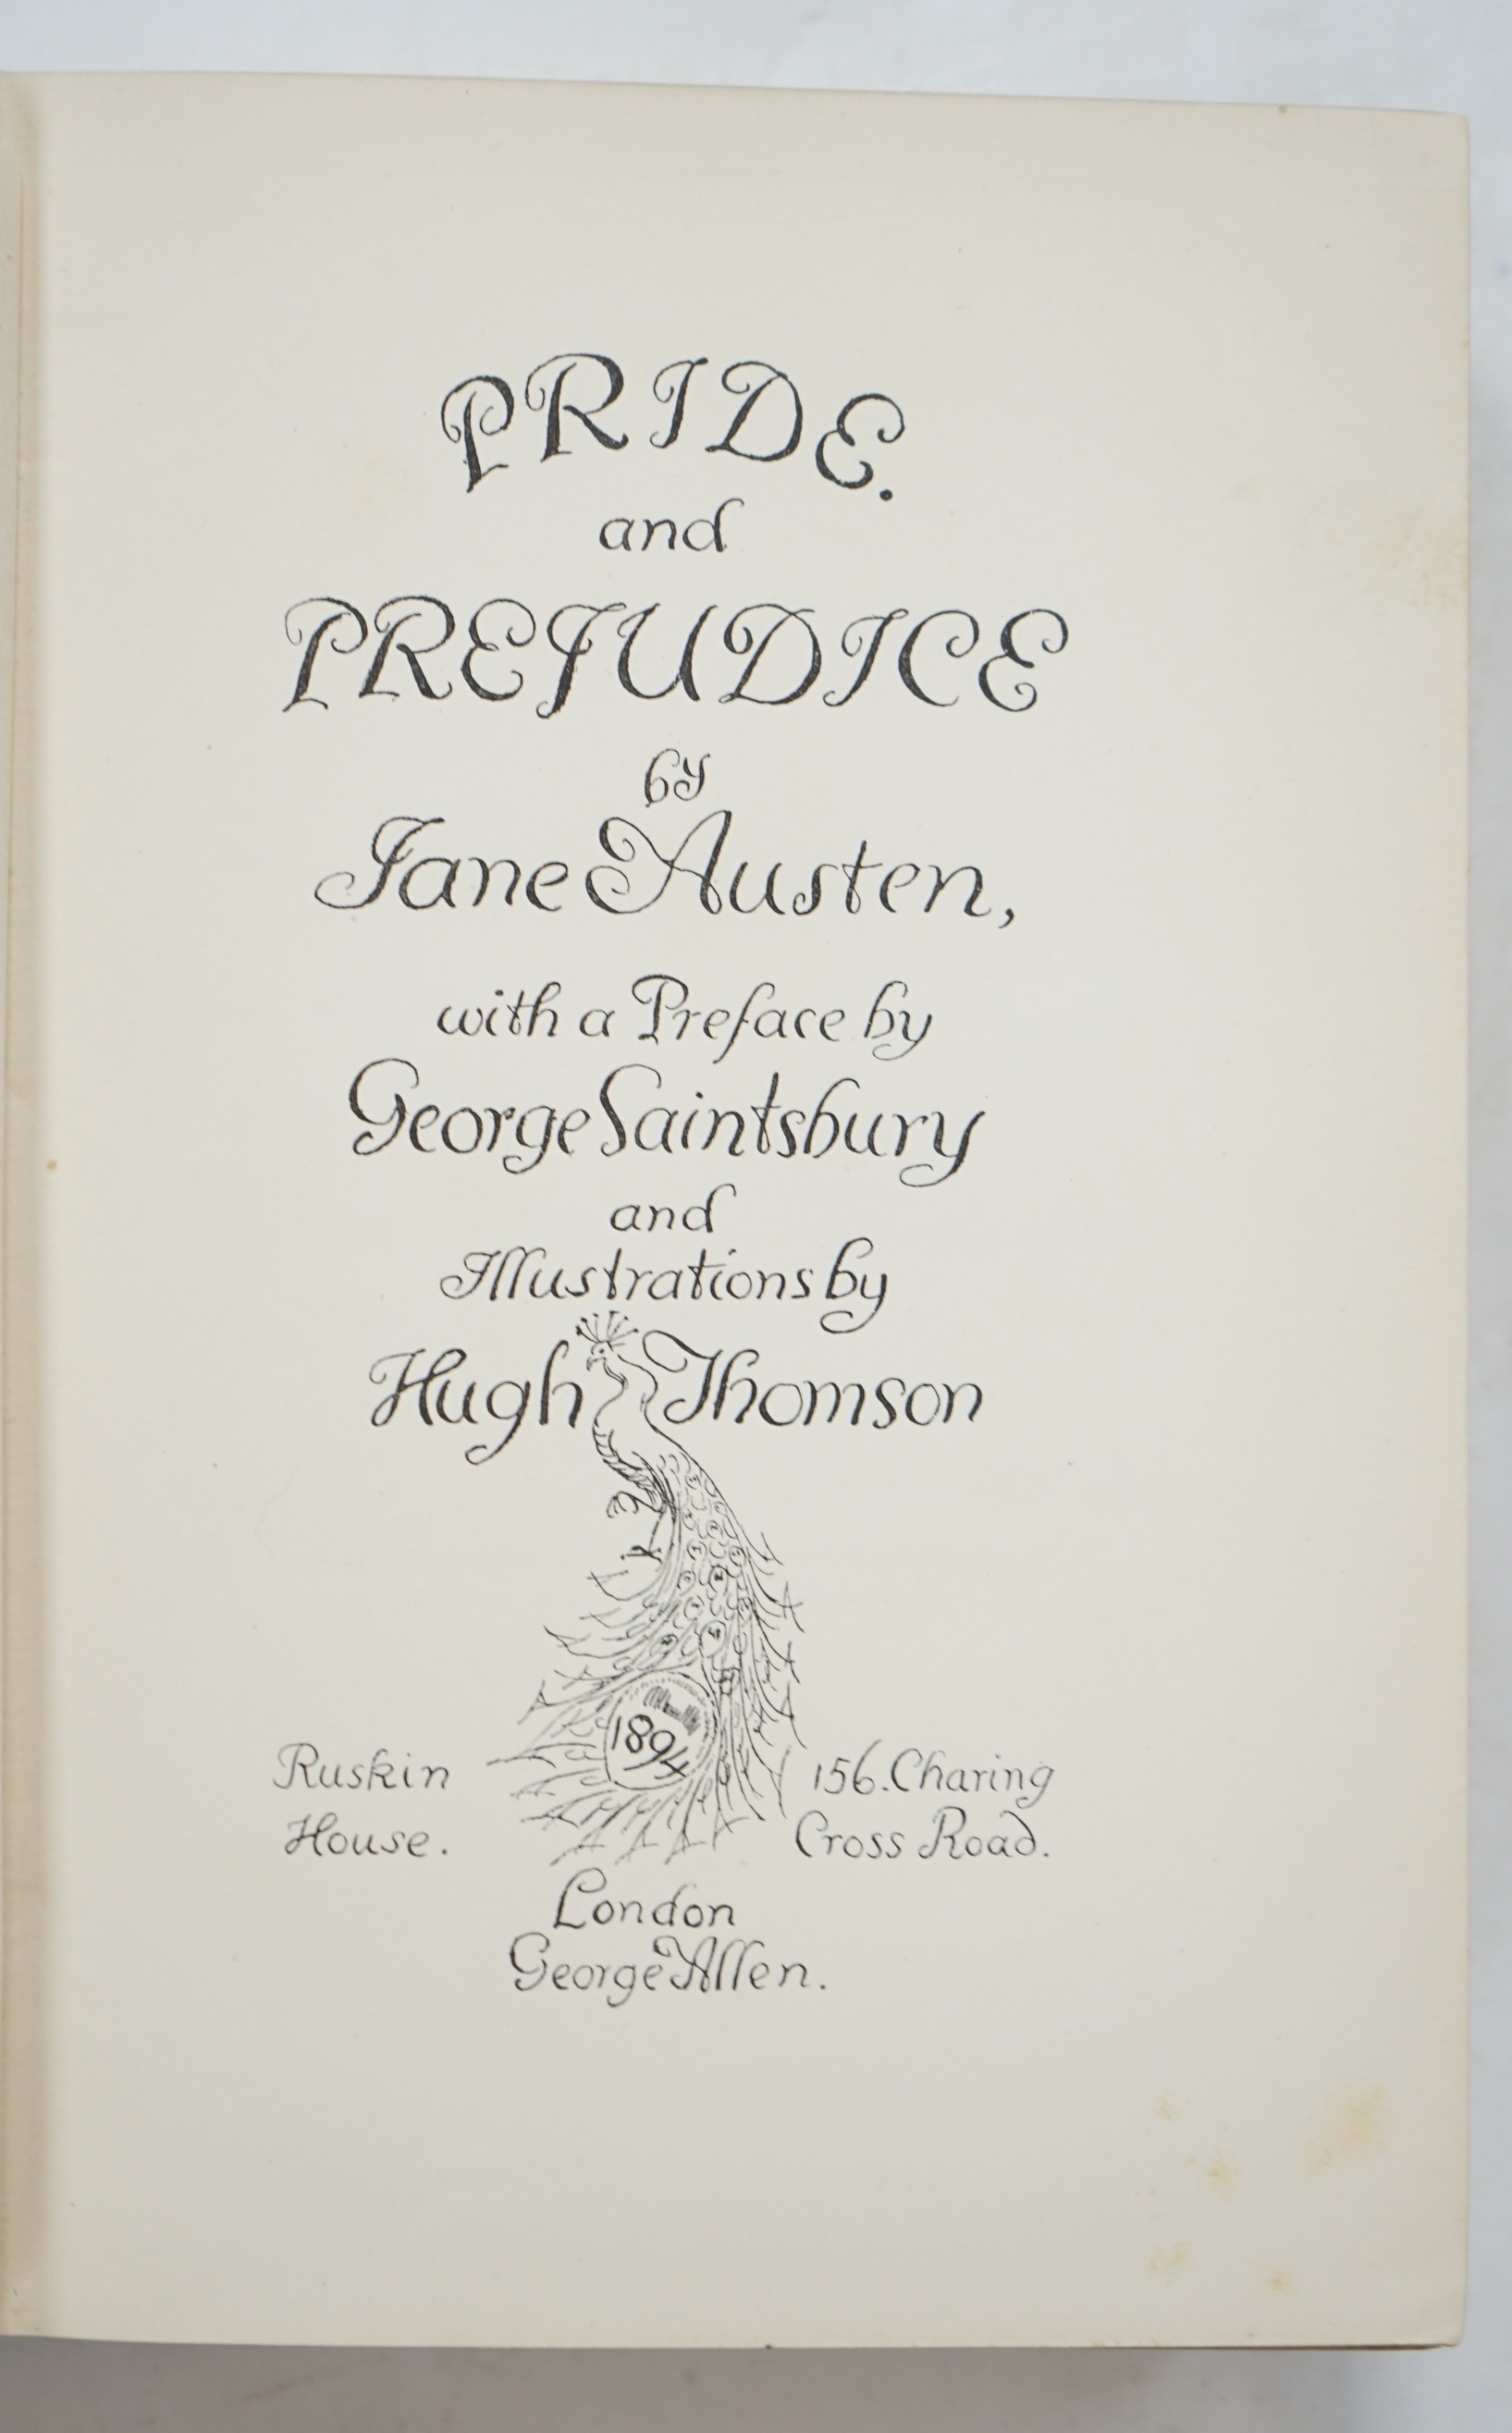 Austen, Jane - Pride and Prejudice....with a preface by George Saintsbury....decorated title, frontispiece and many text illus. and decorations (by Hugh Thomson); original dark green cloth, gilt lettered and with the gil